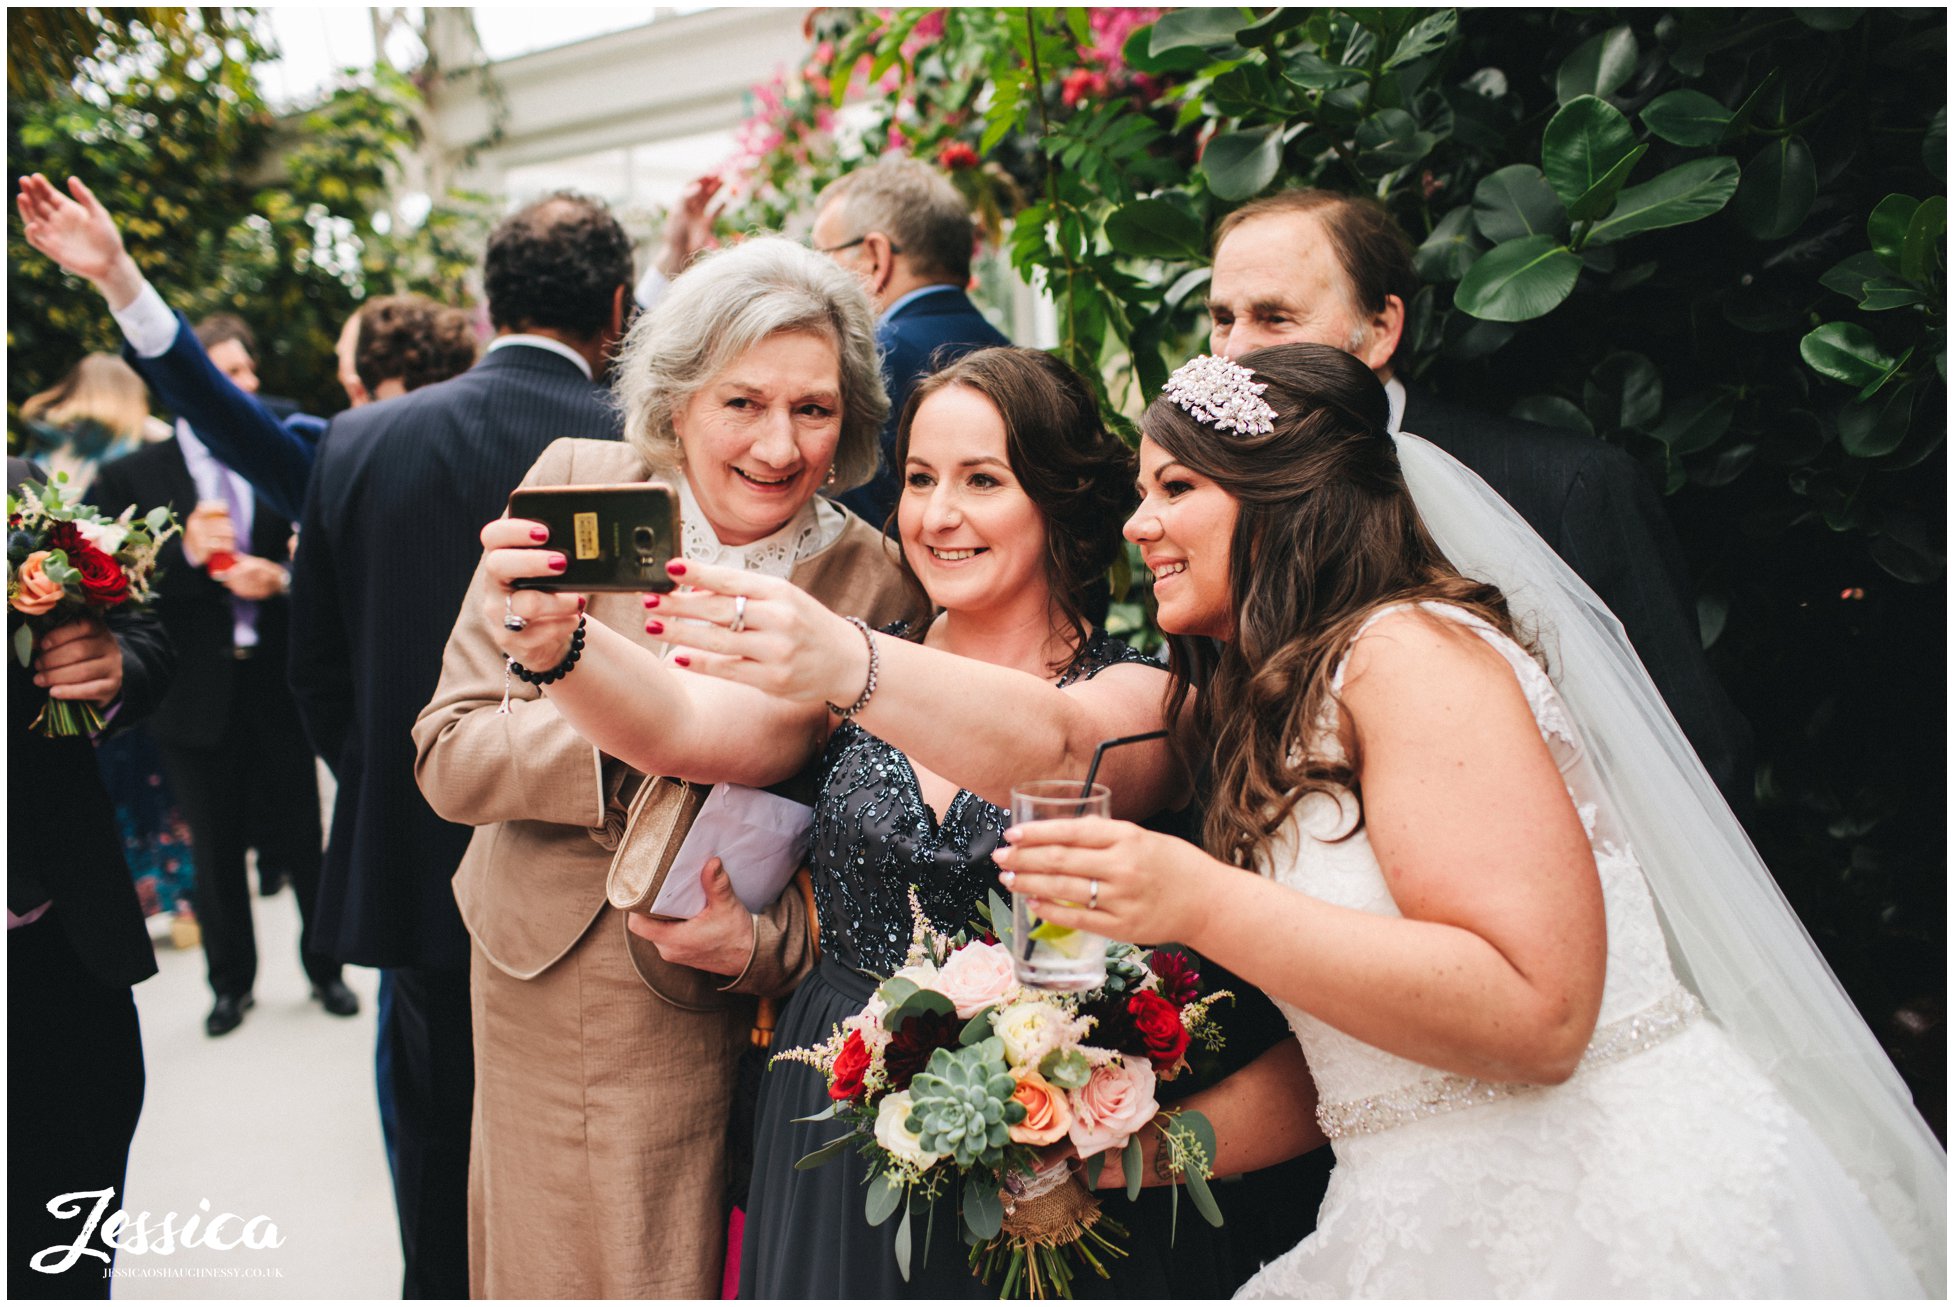 guests take a selfie with the bride